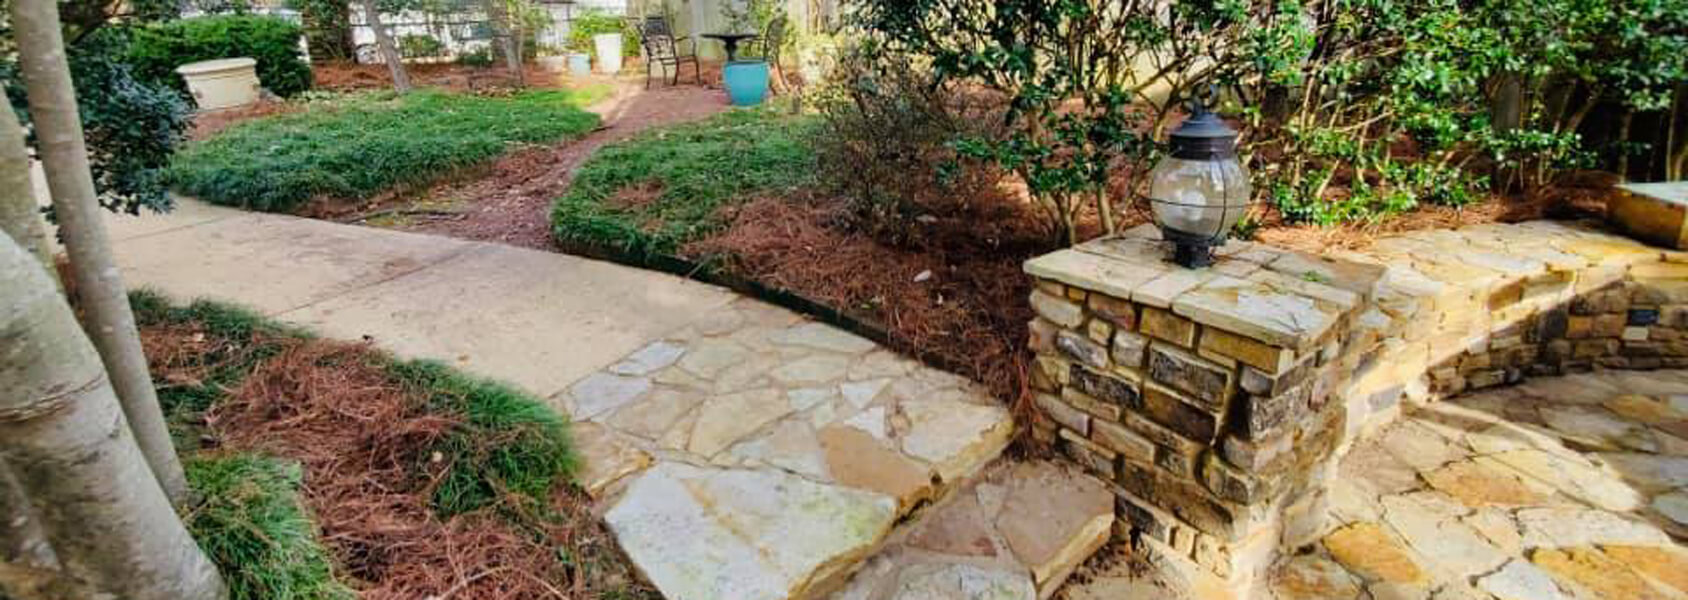 Hardscapes and Outdoor Spaces with Cornerstone Landscapes